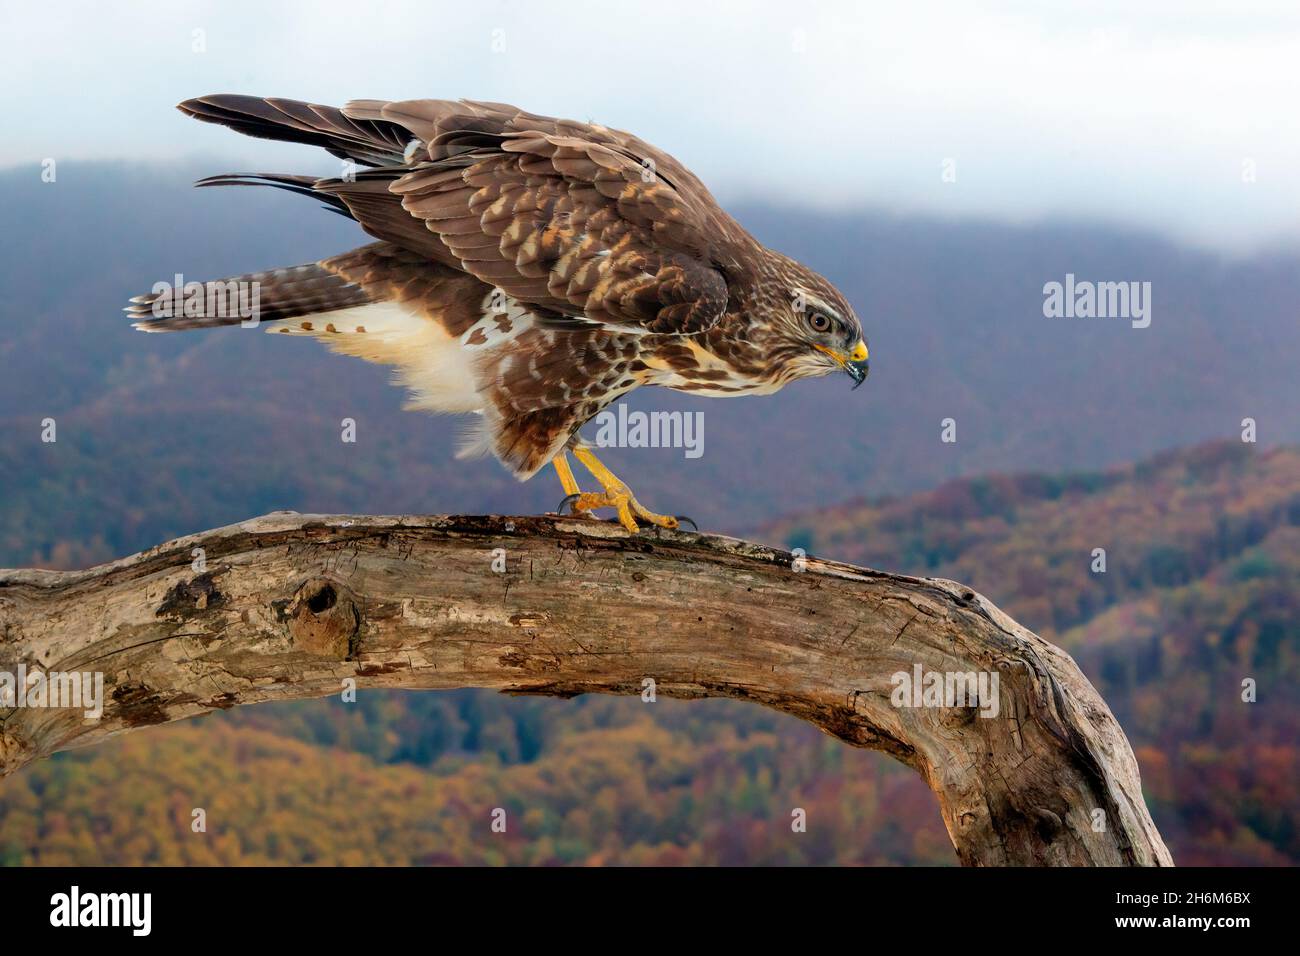 Common Buzzard (Buteo buteo), side view of a juvenile perched on an old trunk with autumn landscape in the background, Campania, Italy Stock Photo